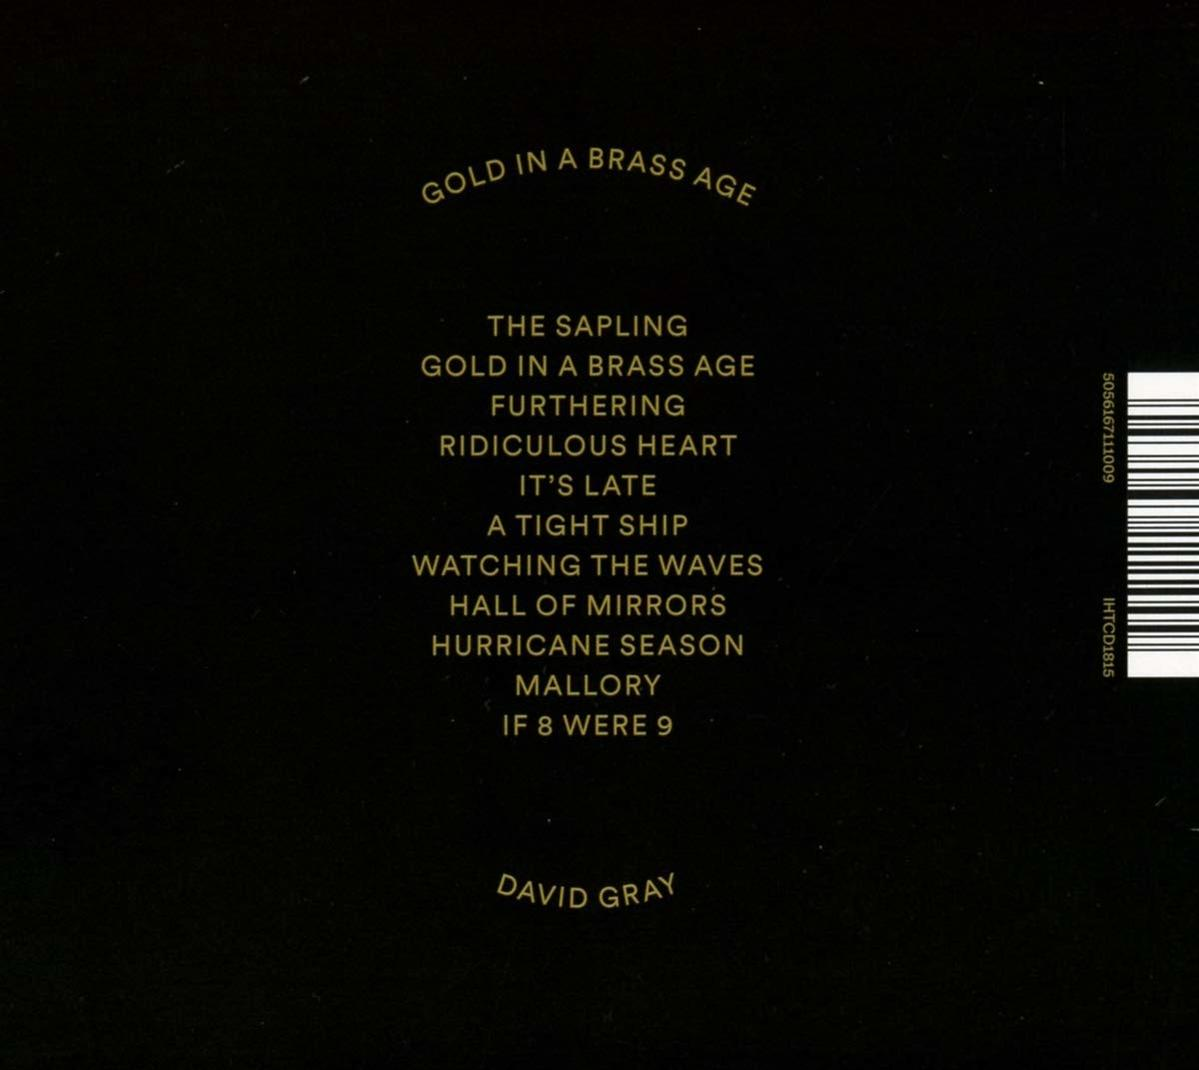 Gold Gray - In Age David - (CD) Brass A